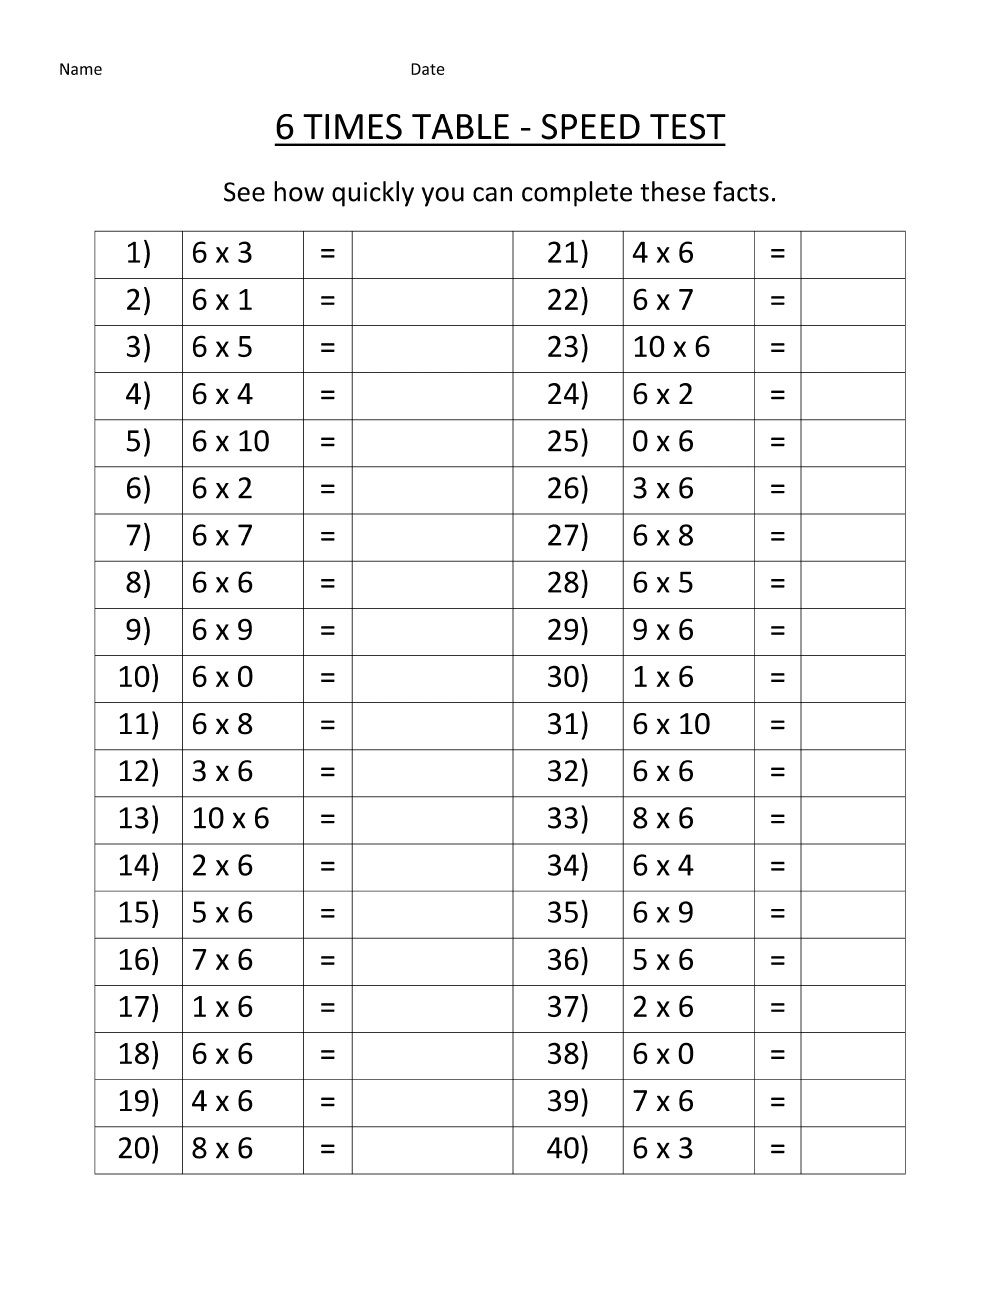 6 Times Table Worksheets Printable | Times Tables Worksheets inside Printable Multiplication Table 6